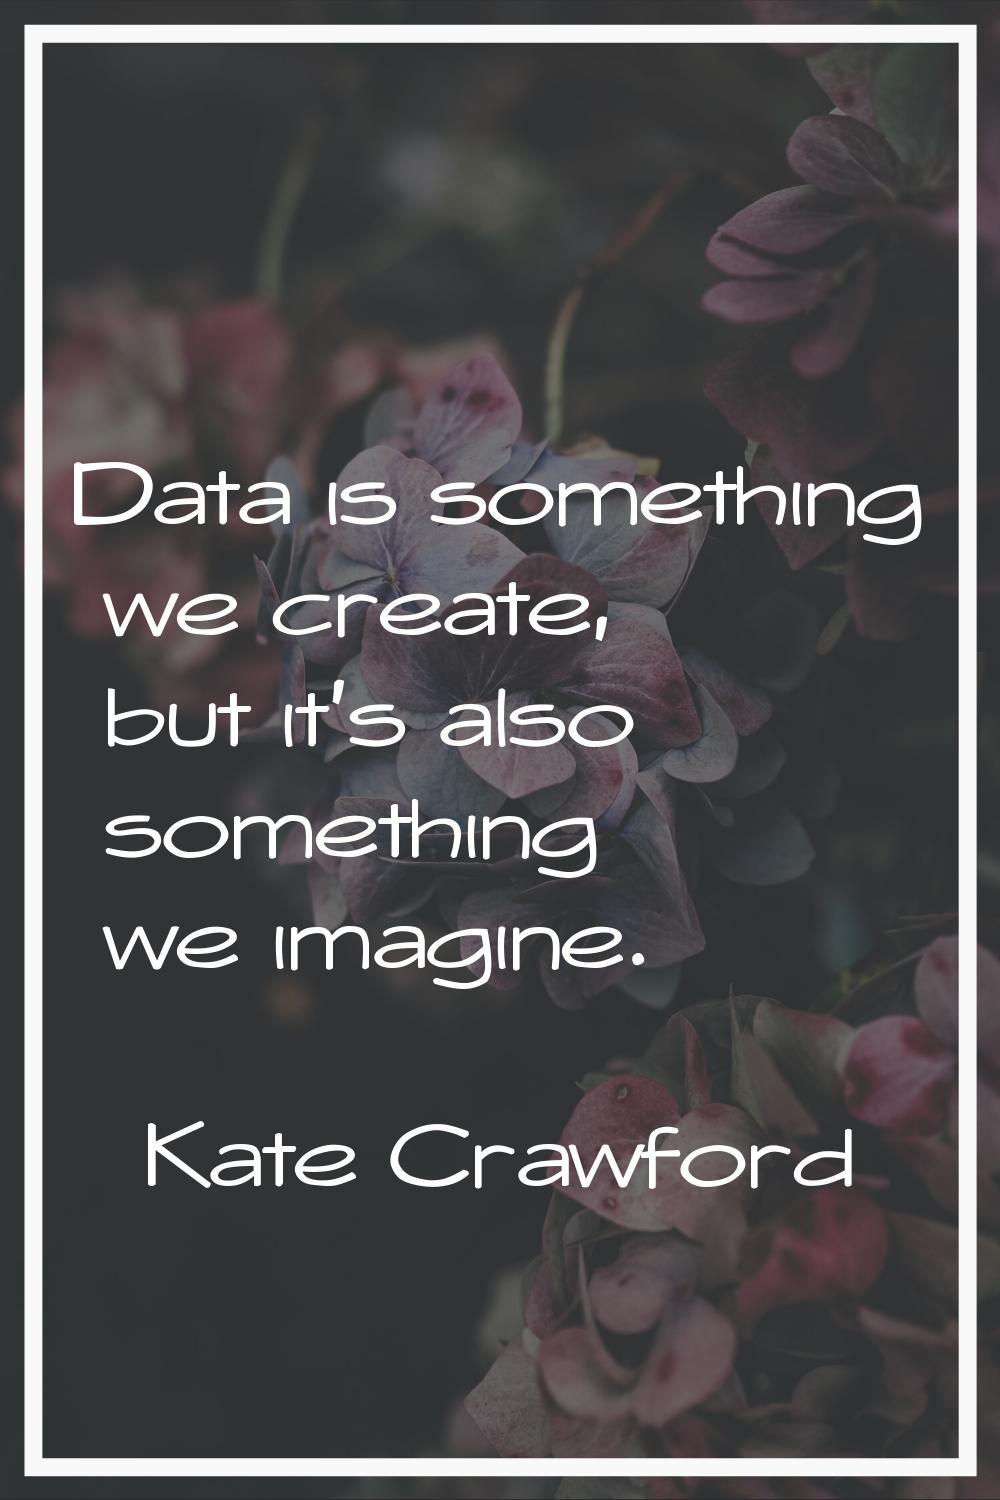 Data is something we create, but it's also something we imagine.